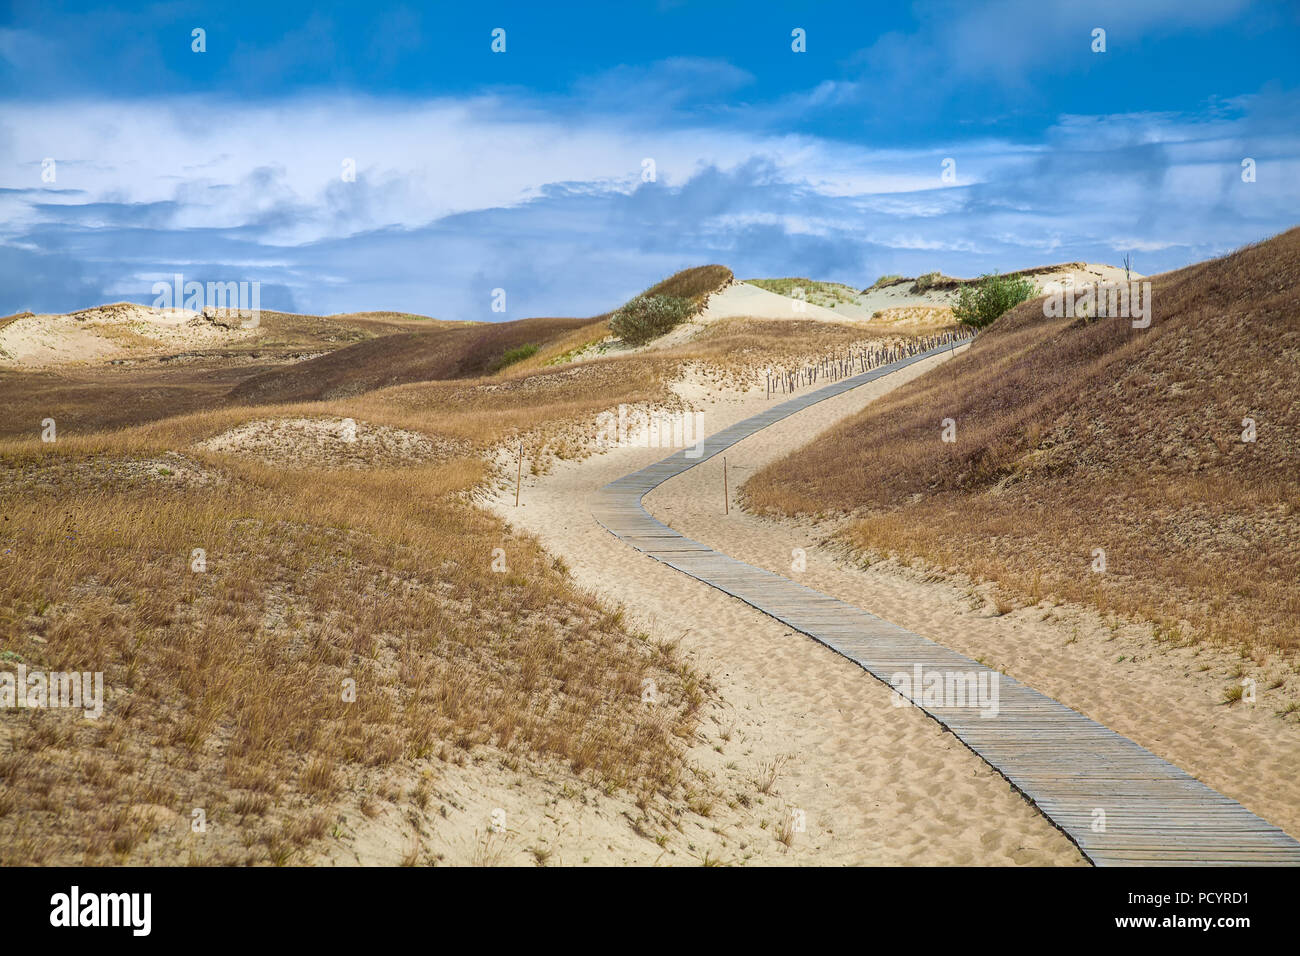 Dunes with wooden walkway over sand near Baltic sea. Board way over sand of beach dunes in Lithuania. Stock Photo